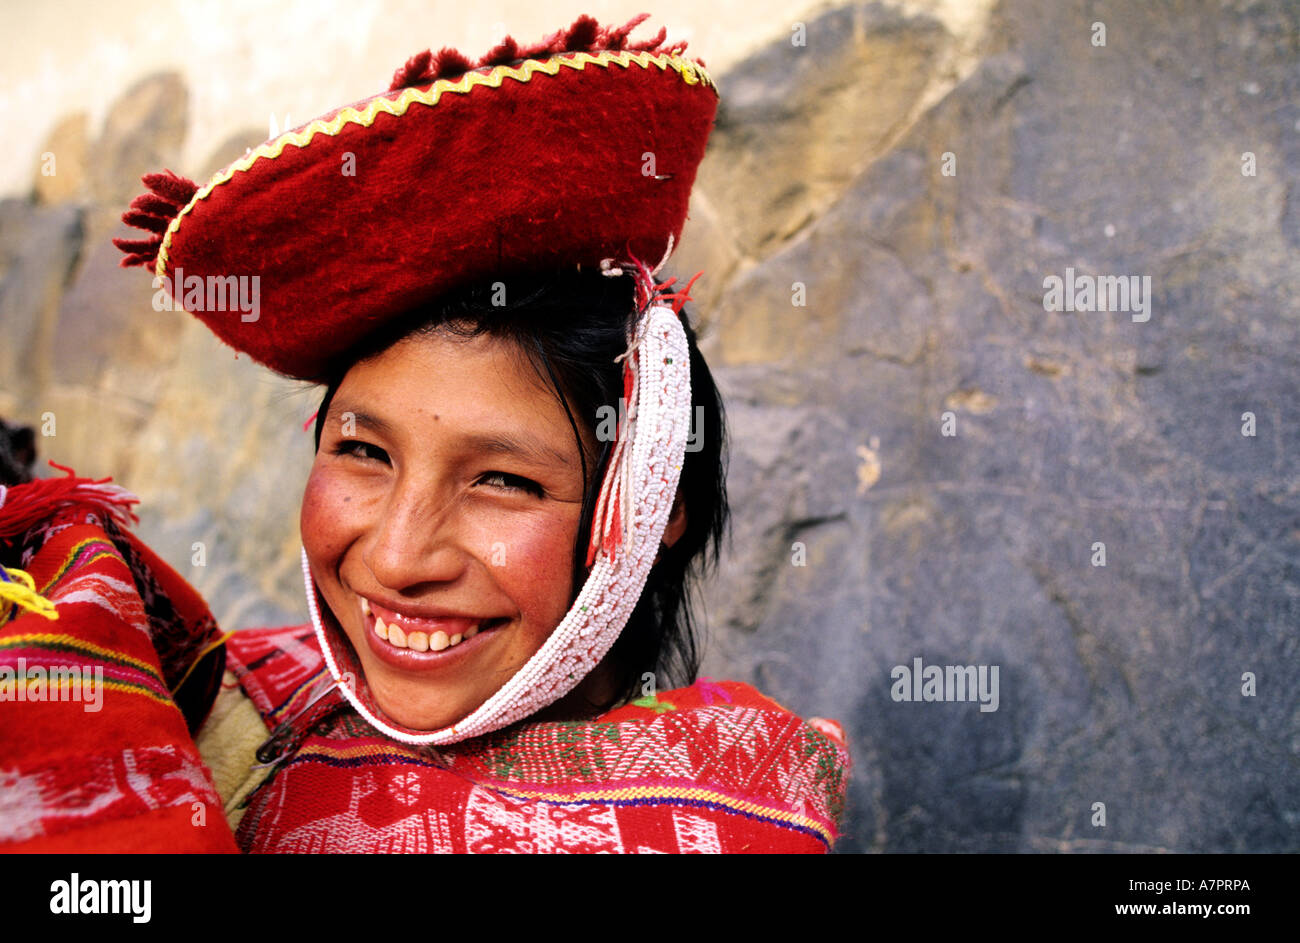 Peru, between Puno and Cuzco, an Indian woman of Altiplano Stock Photo